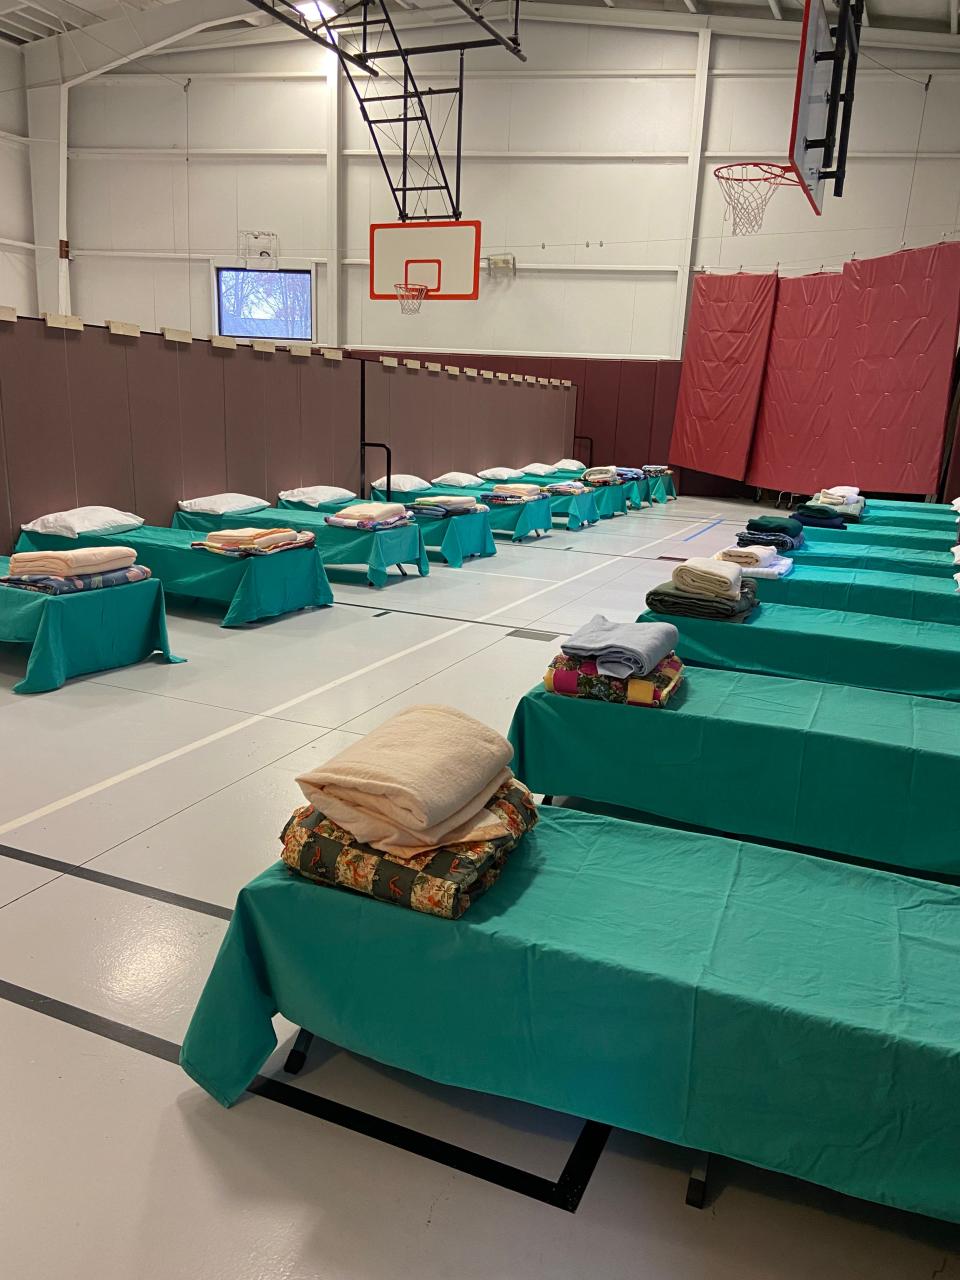 Wayne County has roughly 114 people living in shelters or on the streets, according to a recent point-in-time count. That's more than the 107 counted in 2022 and less than the 140 in 2019. The Salvation Army gymnasium in Wooster serves as a shelter during severe weather for those in need.